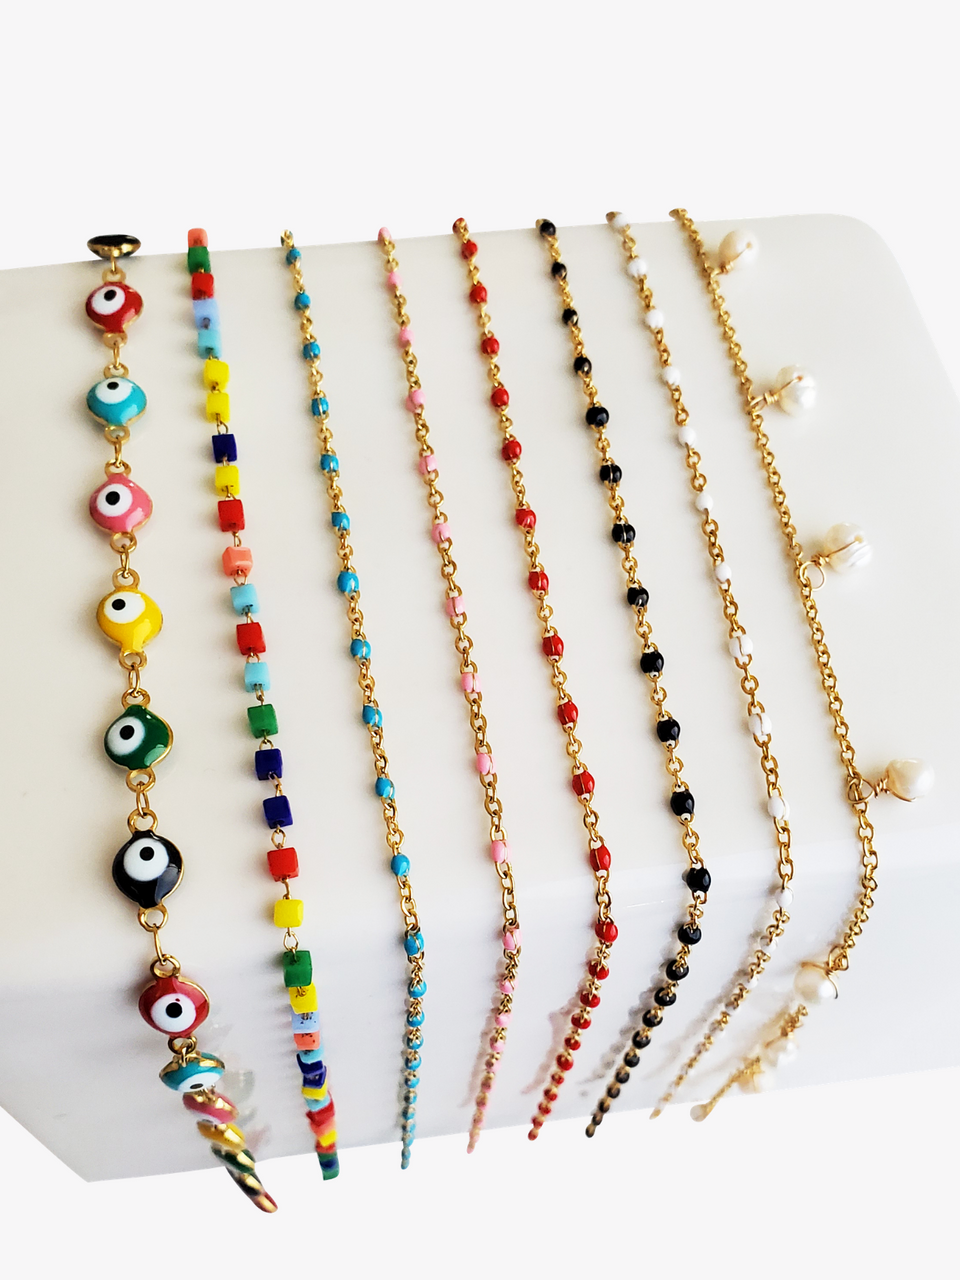 Colorful Beaded Unfinished Necklace Chain Collection, 1 Foot